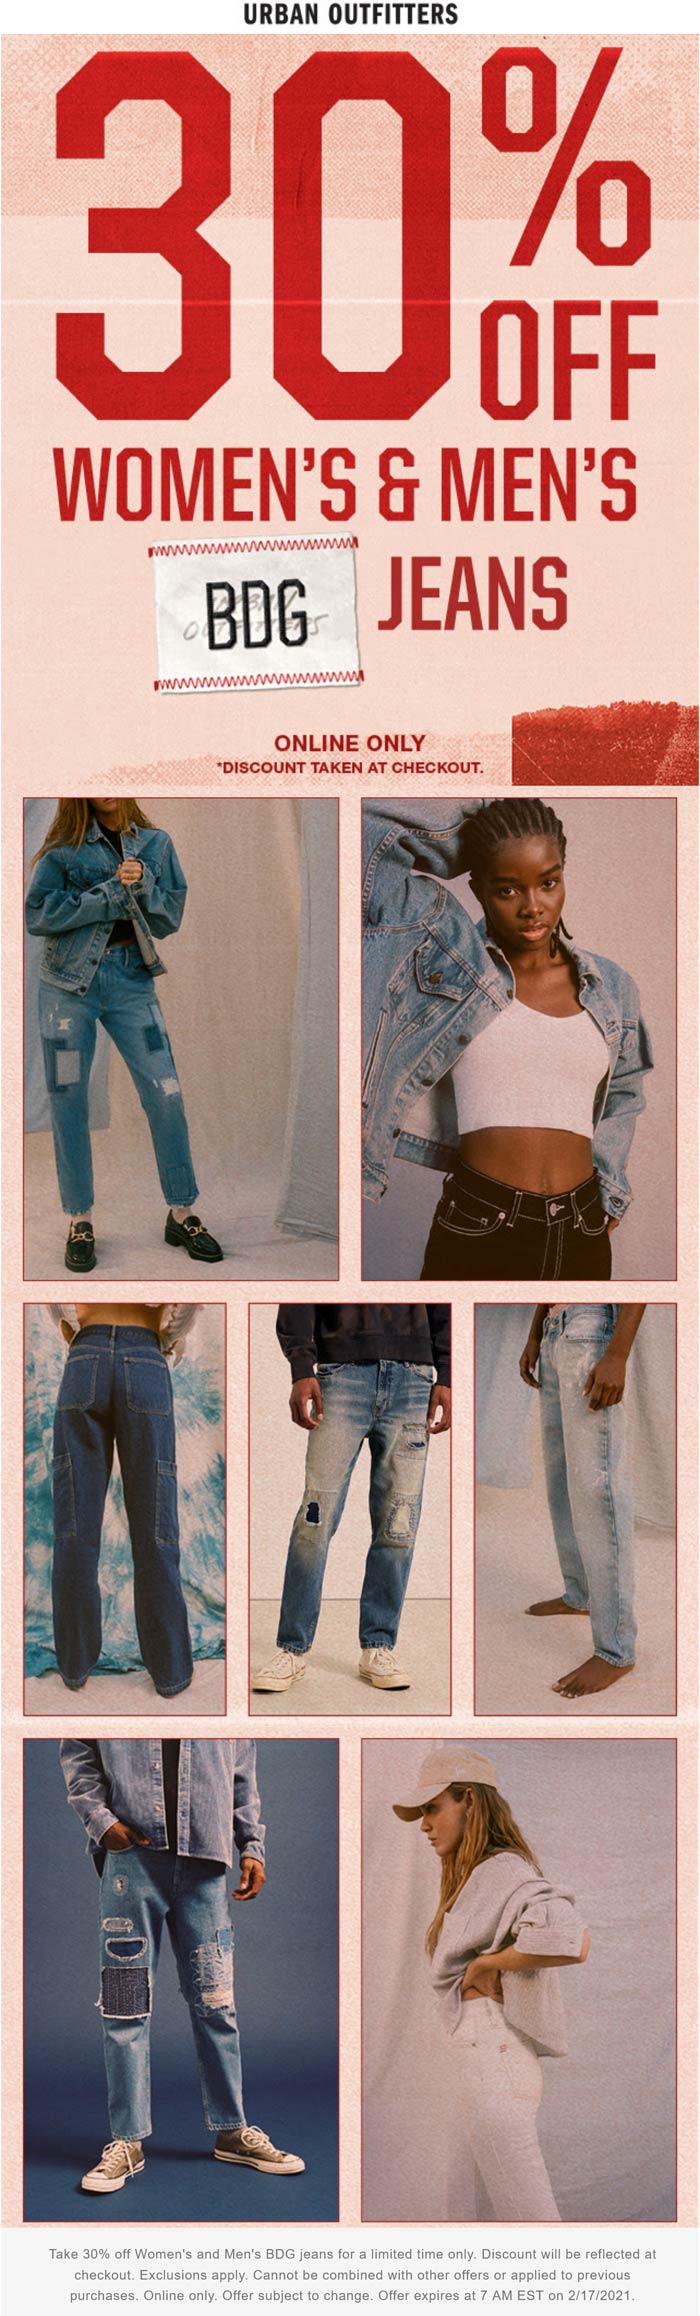 Urban Outfitters stores Coupon  30% off BDG jeans online today at Urban Outfitters #urbanoutfitters 